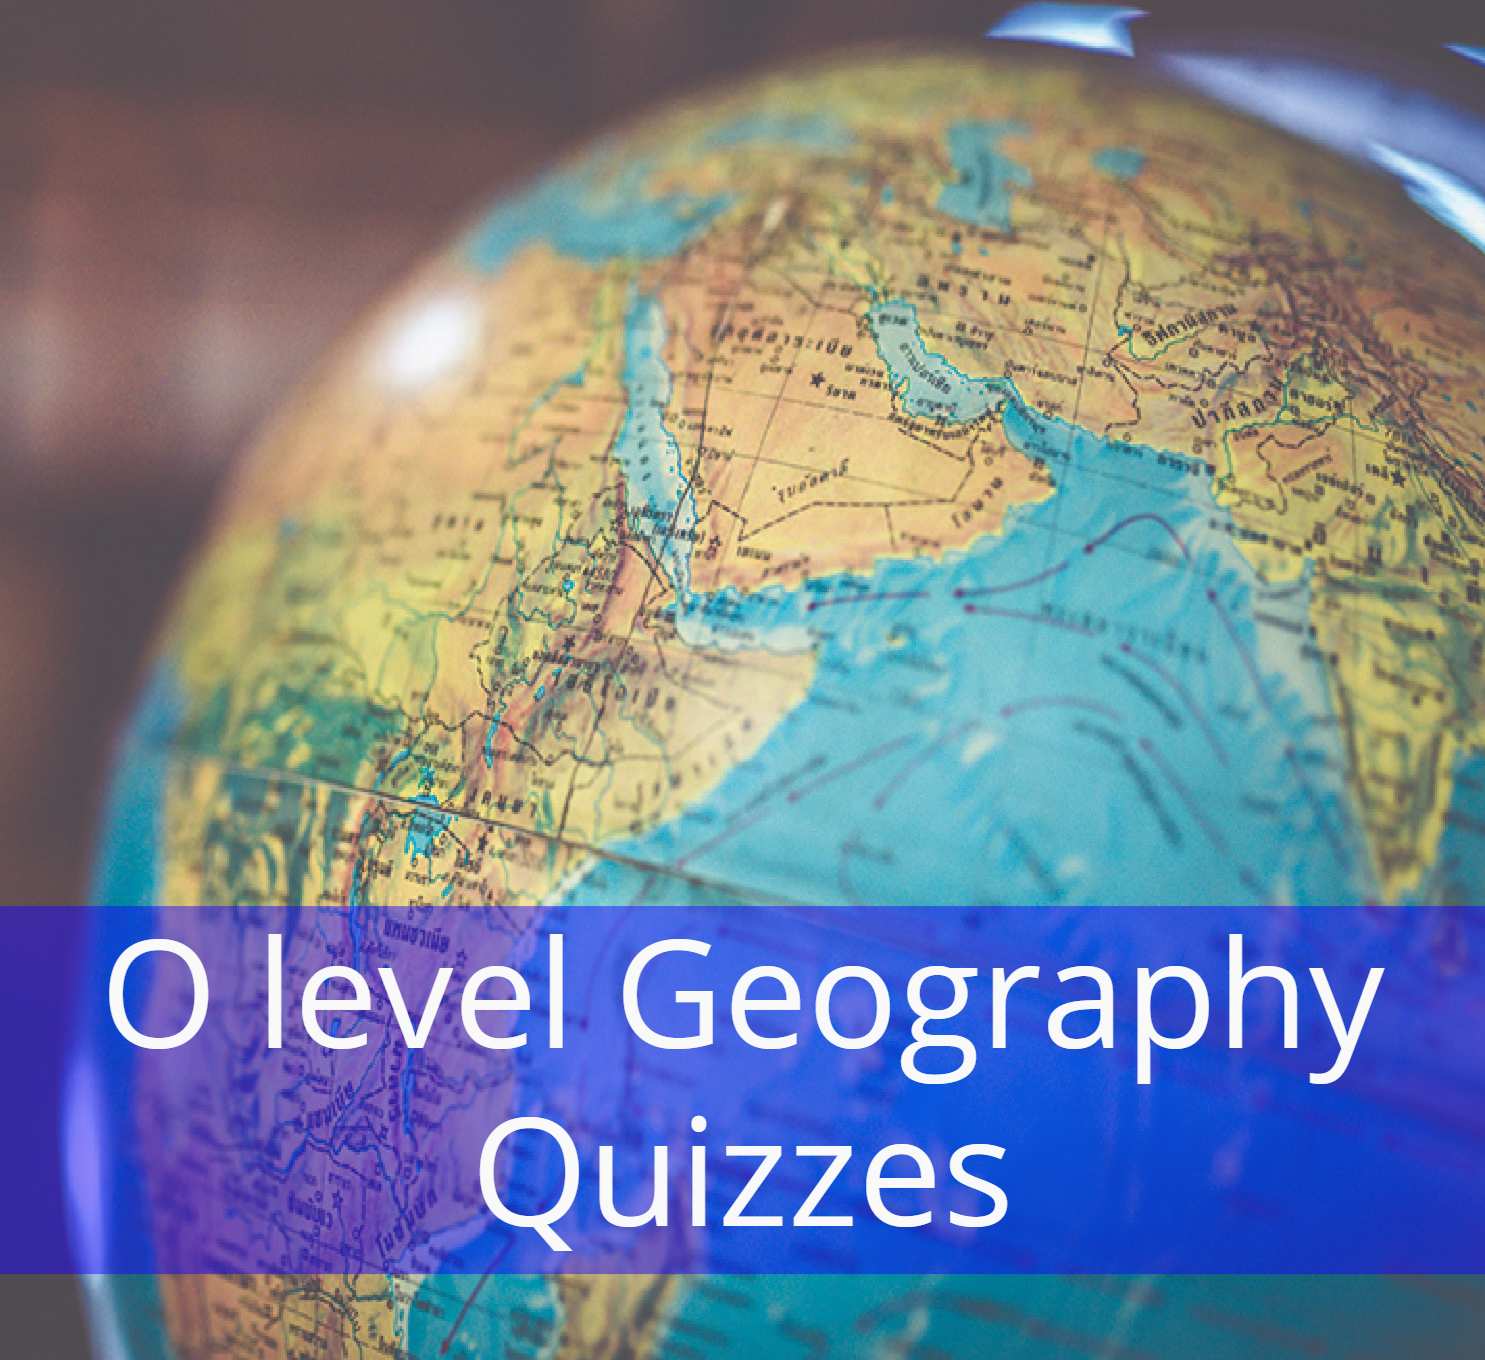 O level Geography Quizzes